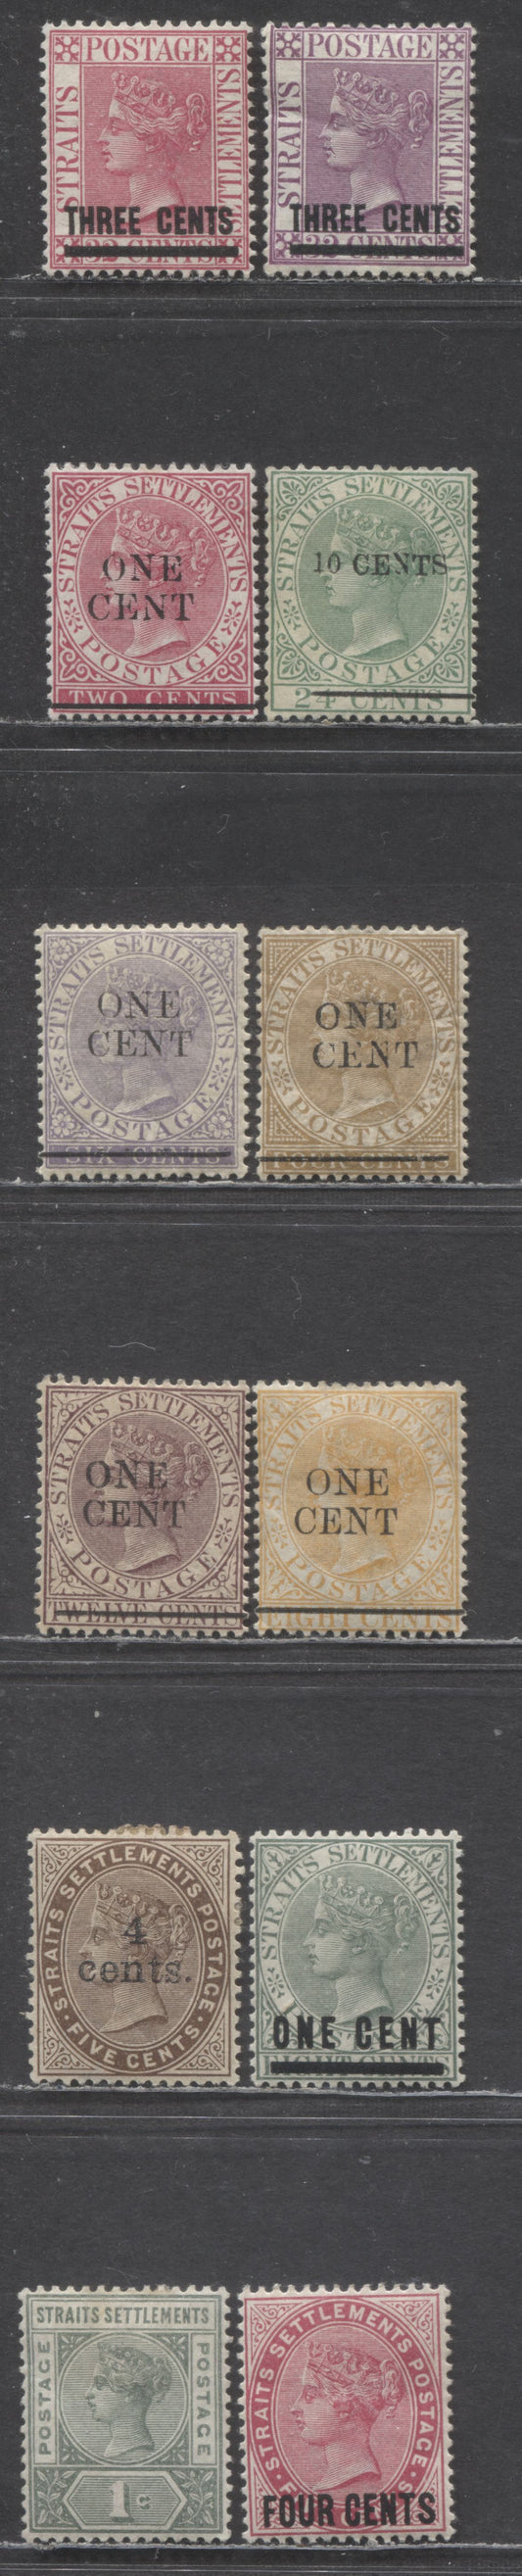 Lot 93 Straits Settlements SC#73/92 1885-1899 Surcharges & Imperium Keyplates Issues, 12 F/VFOG & Unused Singles, Click on Listing to See ALL Pictures, Estimated Value $35